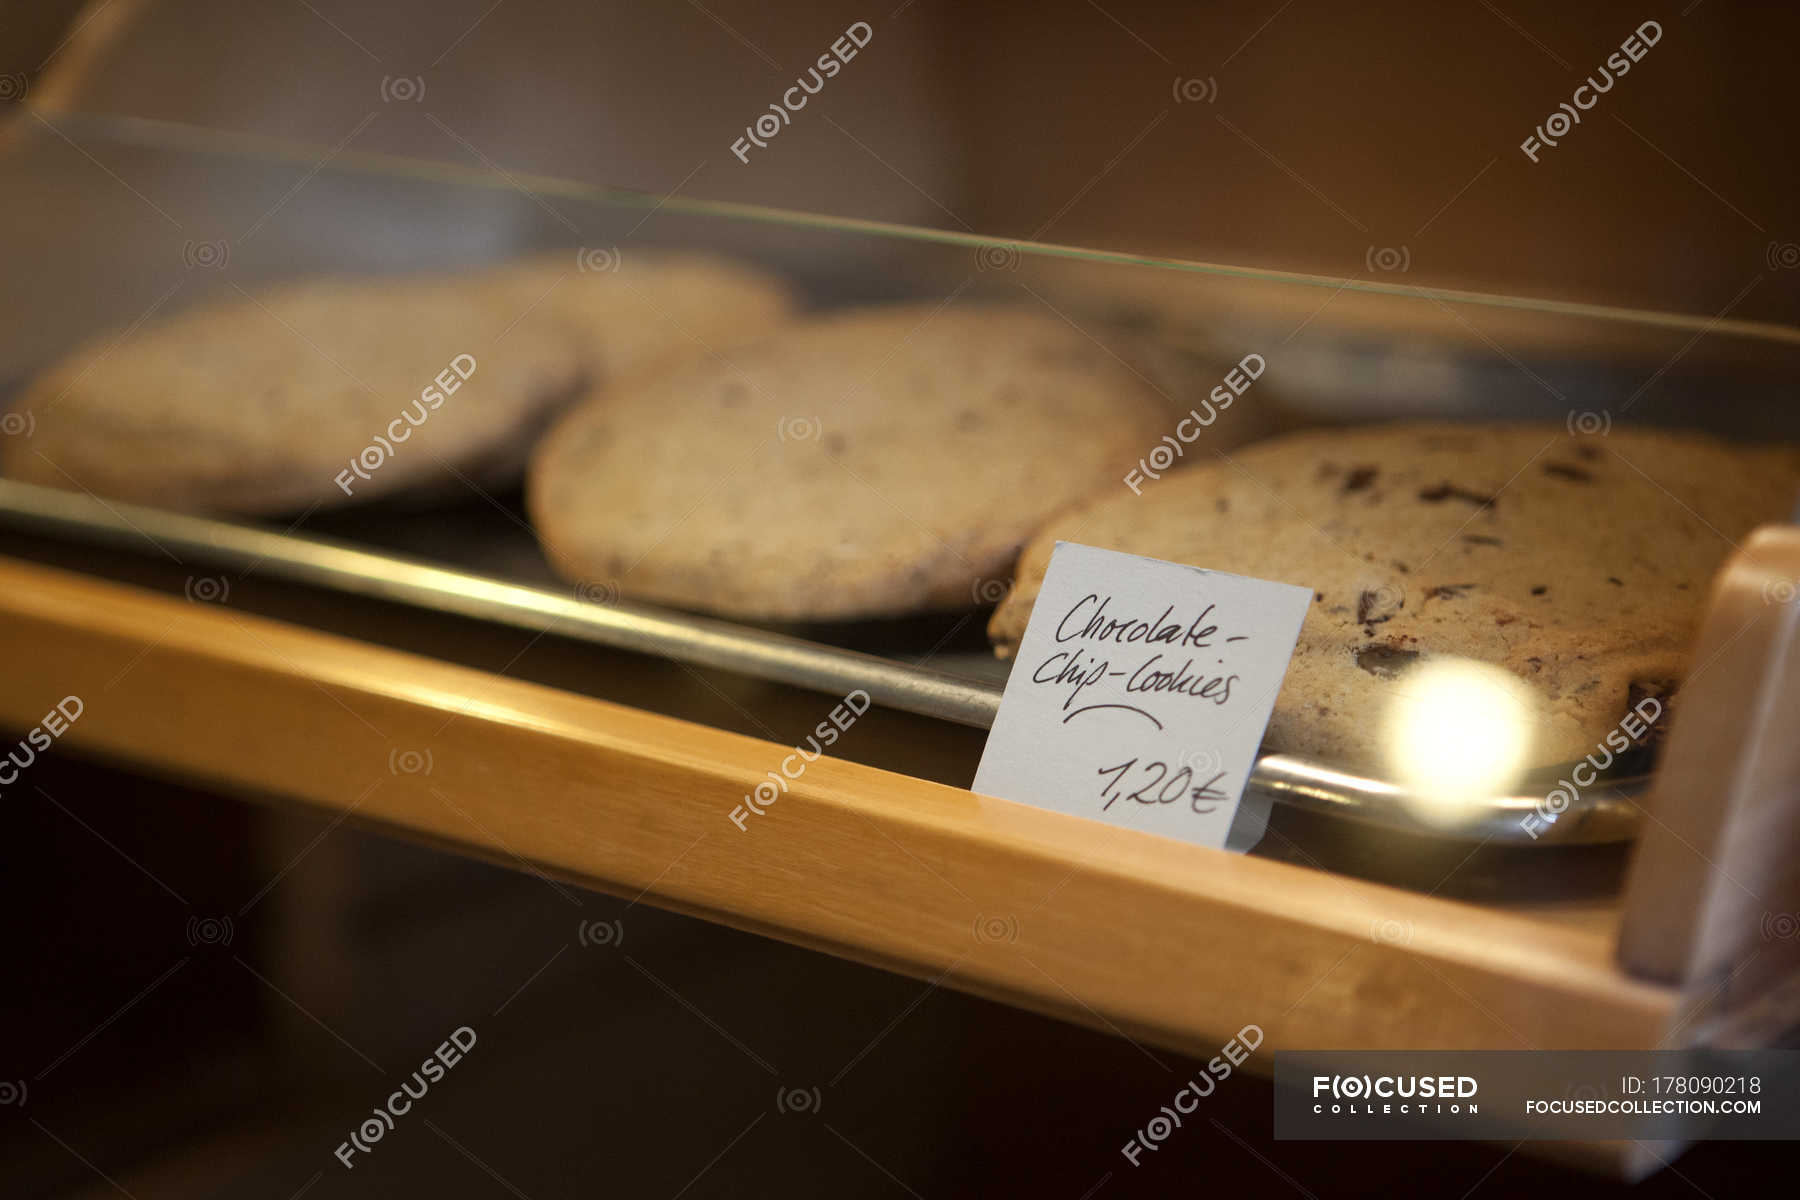 Price Tag On Tray Of Chocolate Chip Cookies In Cafe Display